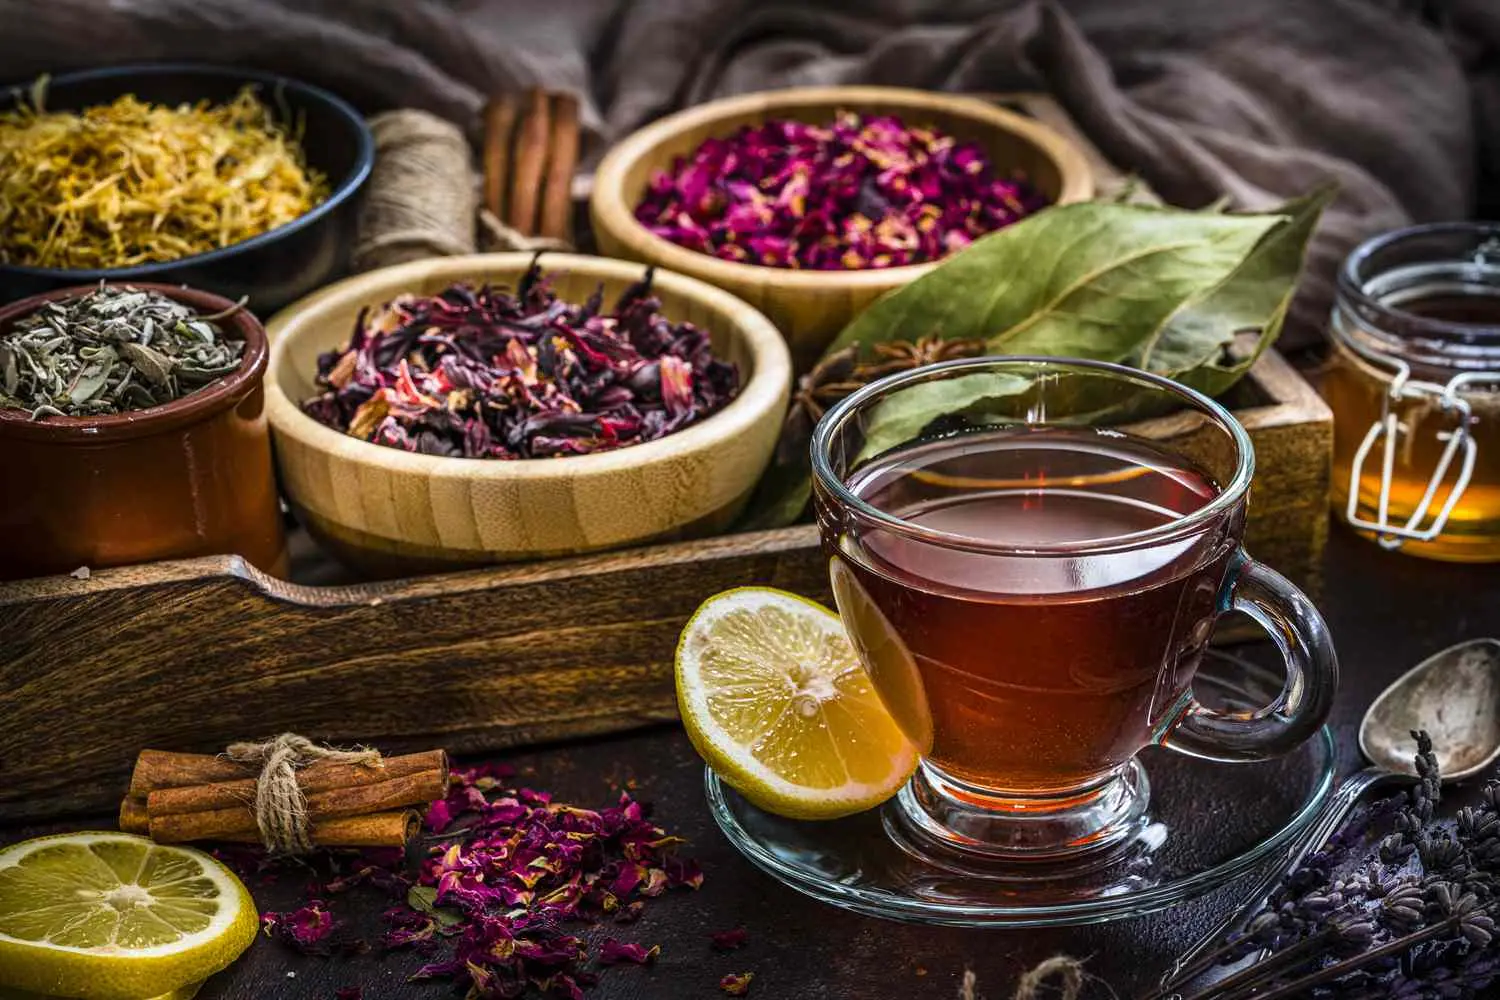 tea-cup-with-several-dried-tea-leaves-and-flowers-1201496311-55f0a4dfdbc54605966a0a9ec2f40f3c